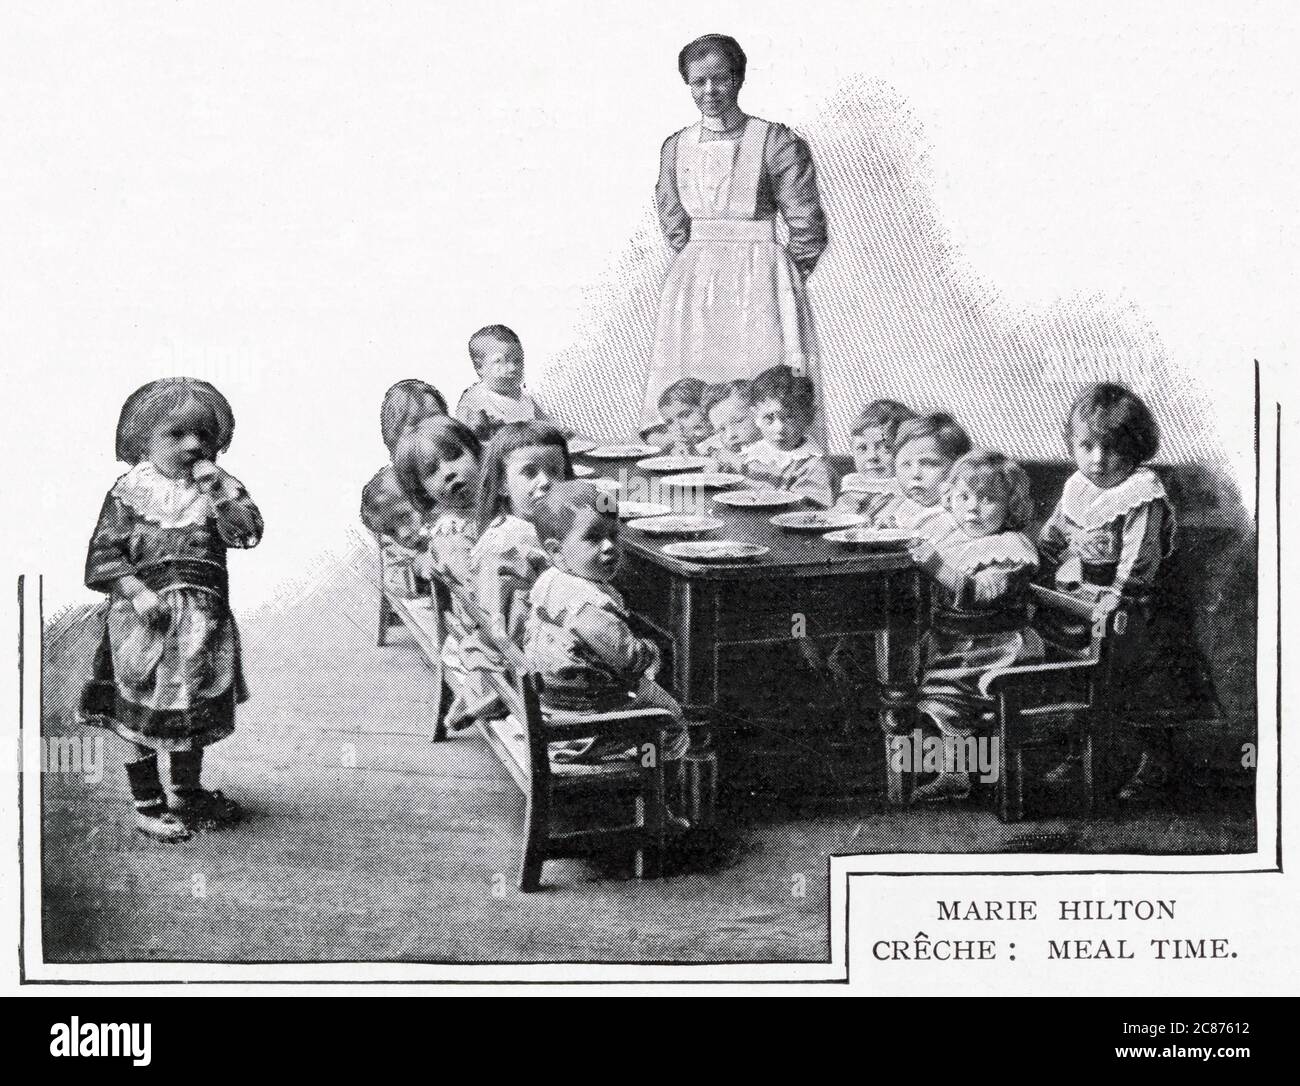 Meal time at Marie Hilton Creche, Stepney Causeway, London. Hilton set up a facility of about 100 infants between the ages of three weeks and five years to be cared for. Poor parents could pay two pence a day for their child to be fed, rested, and dressed in freshly washed clothes and then return to them after work in the evening. Stock Photo